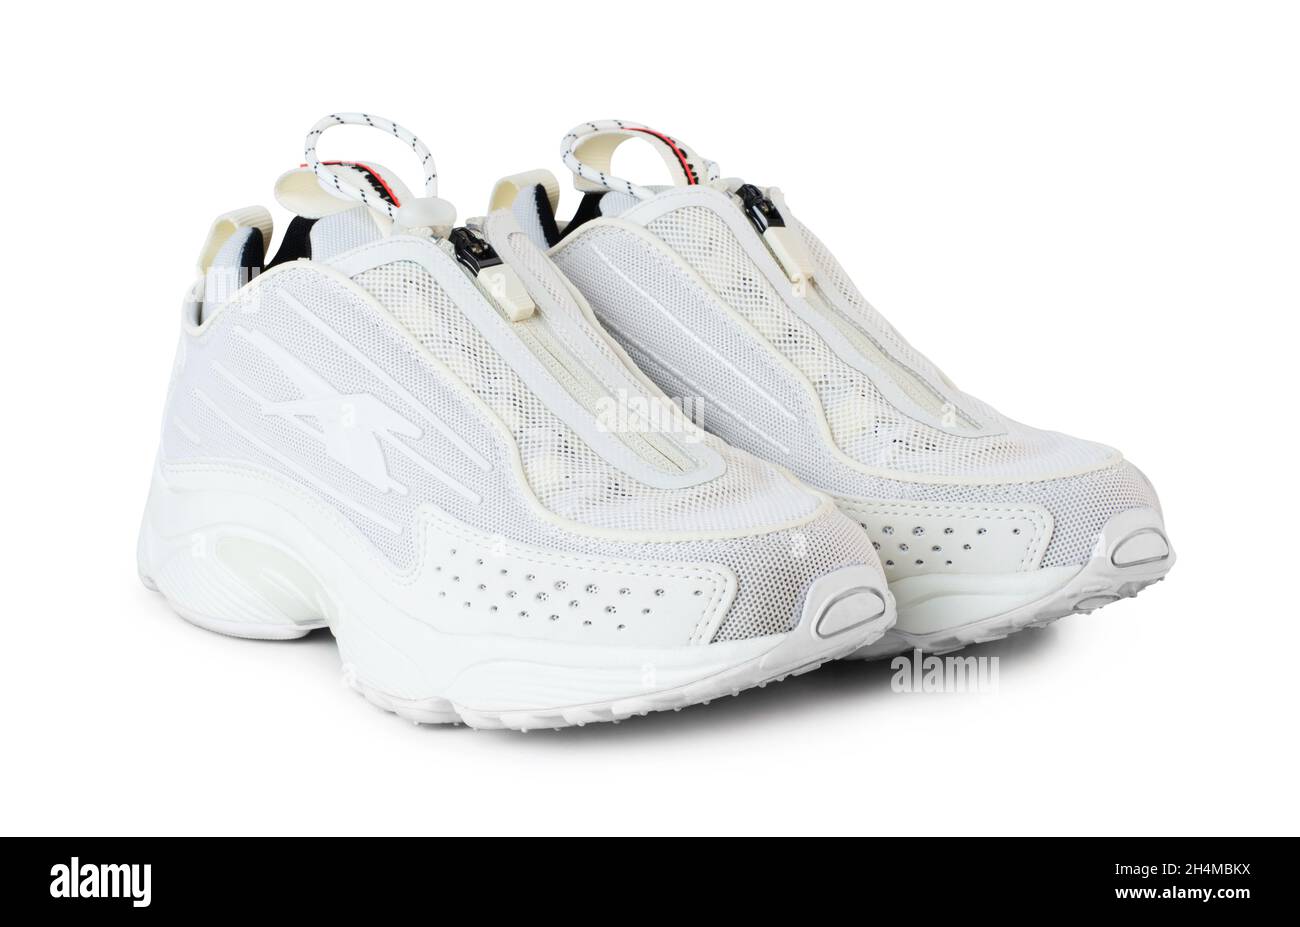 SAMARA, RUSSIA - August 12, 2021: Reebok sneakers for running, or training, isolated on a white background showing the Reebok logo. Stock Photo